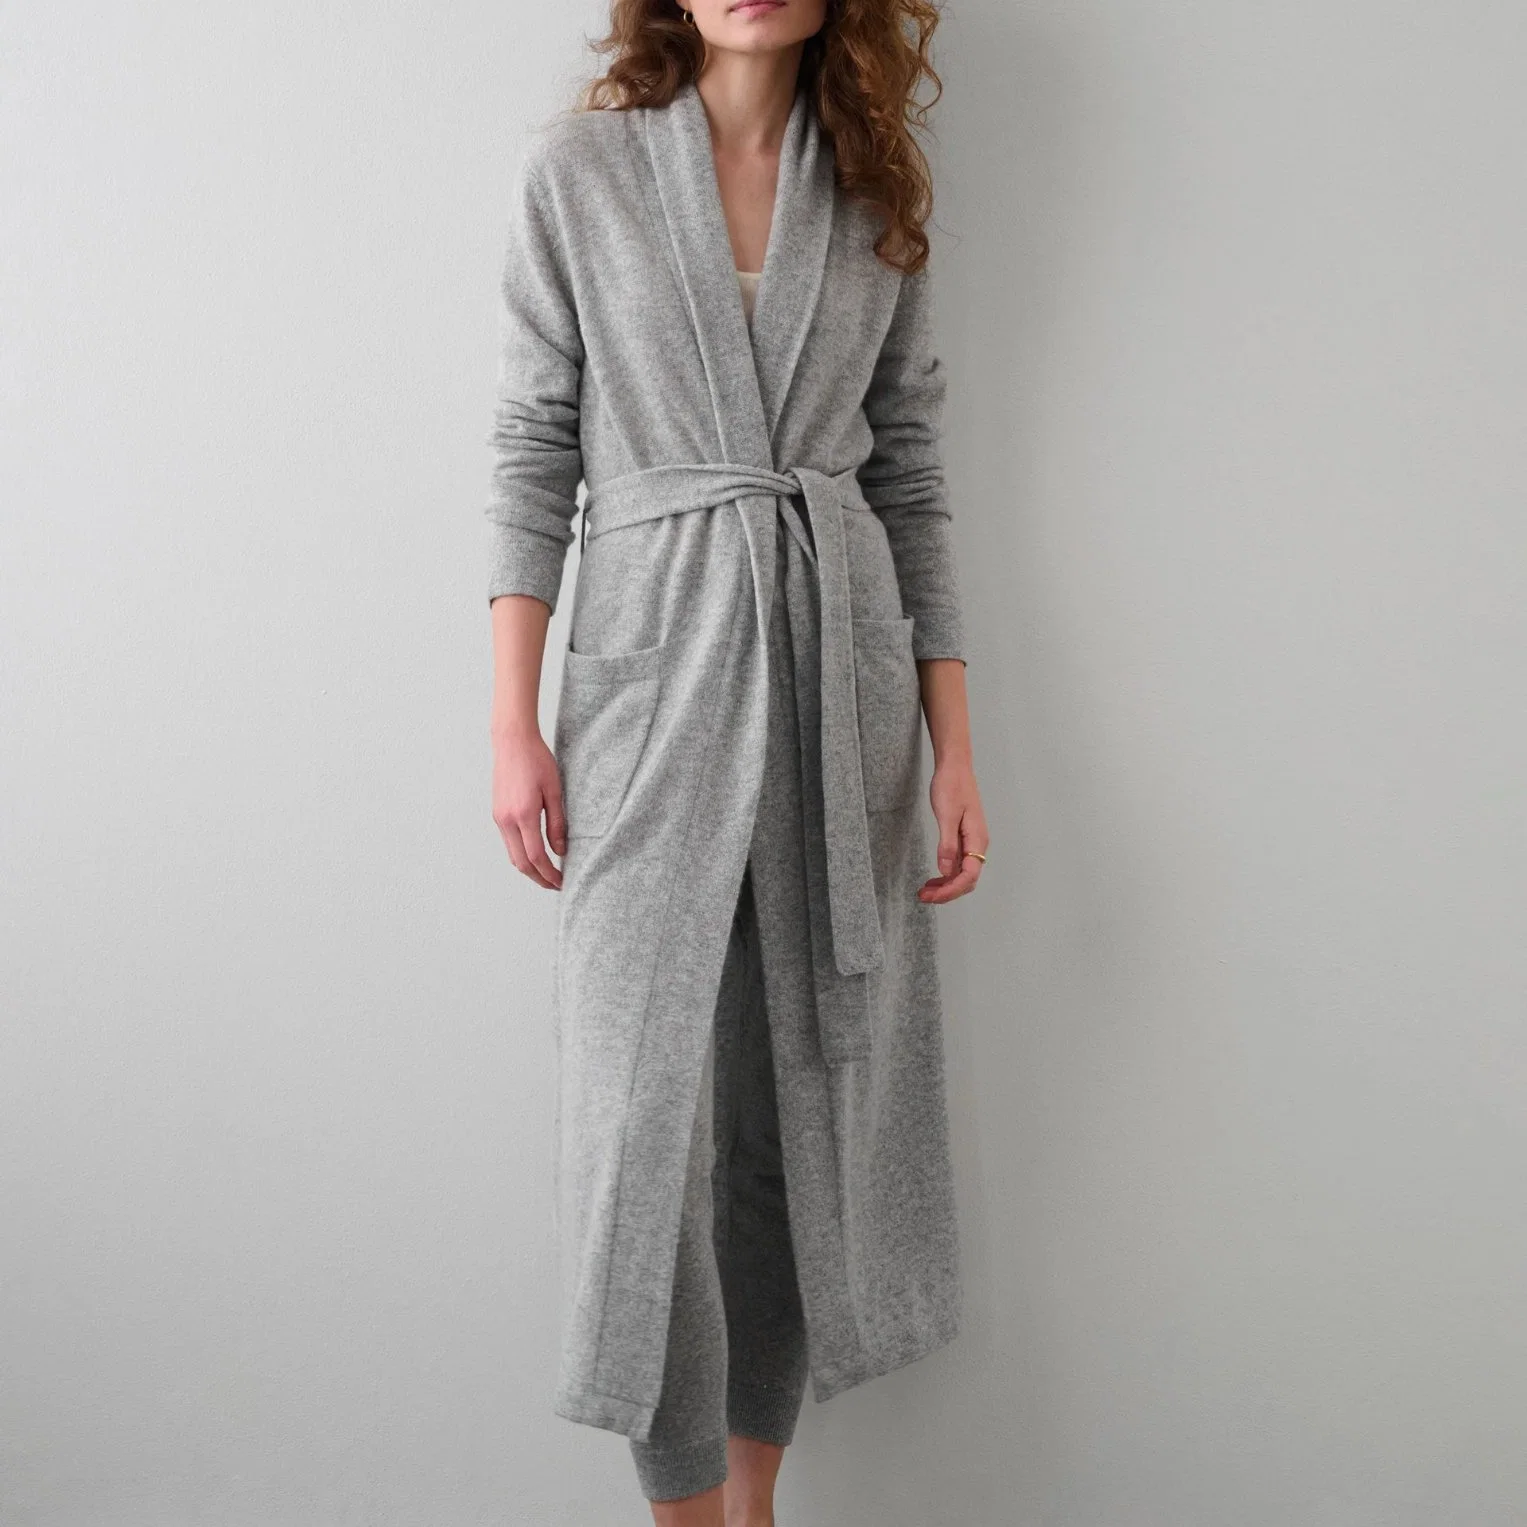 100% Cashmere Knitted Ladies Fashion Dresses Night Robe Gown Apparel